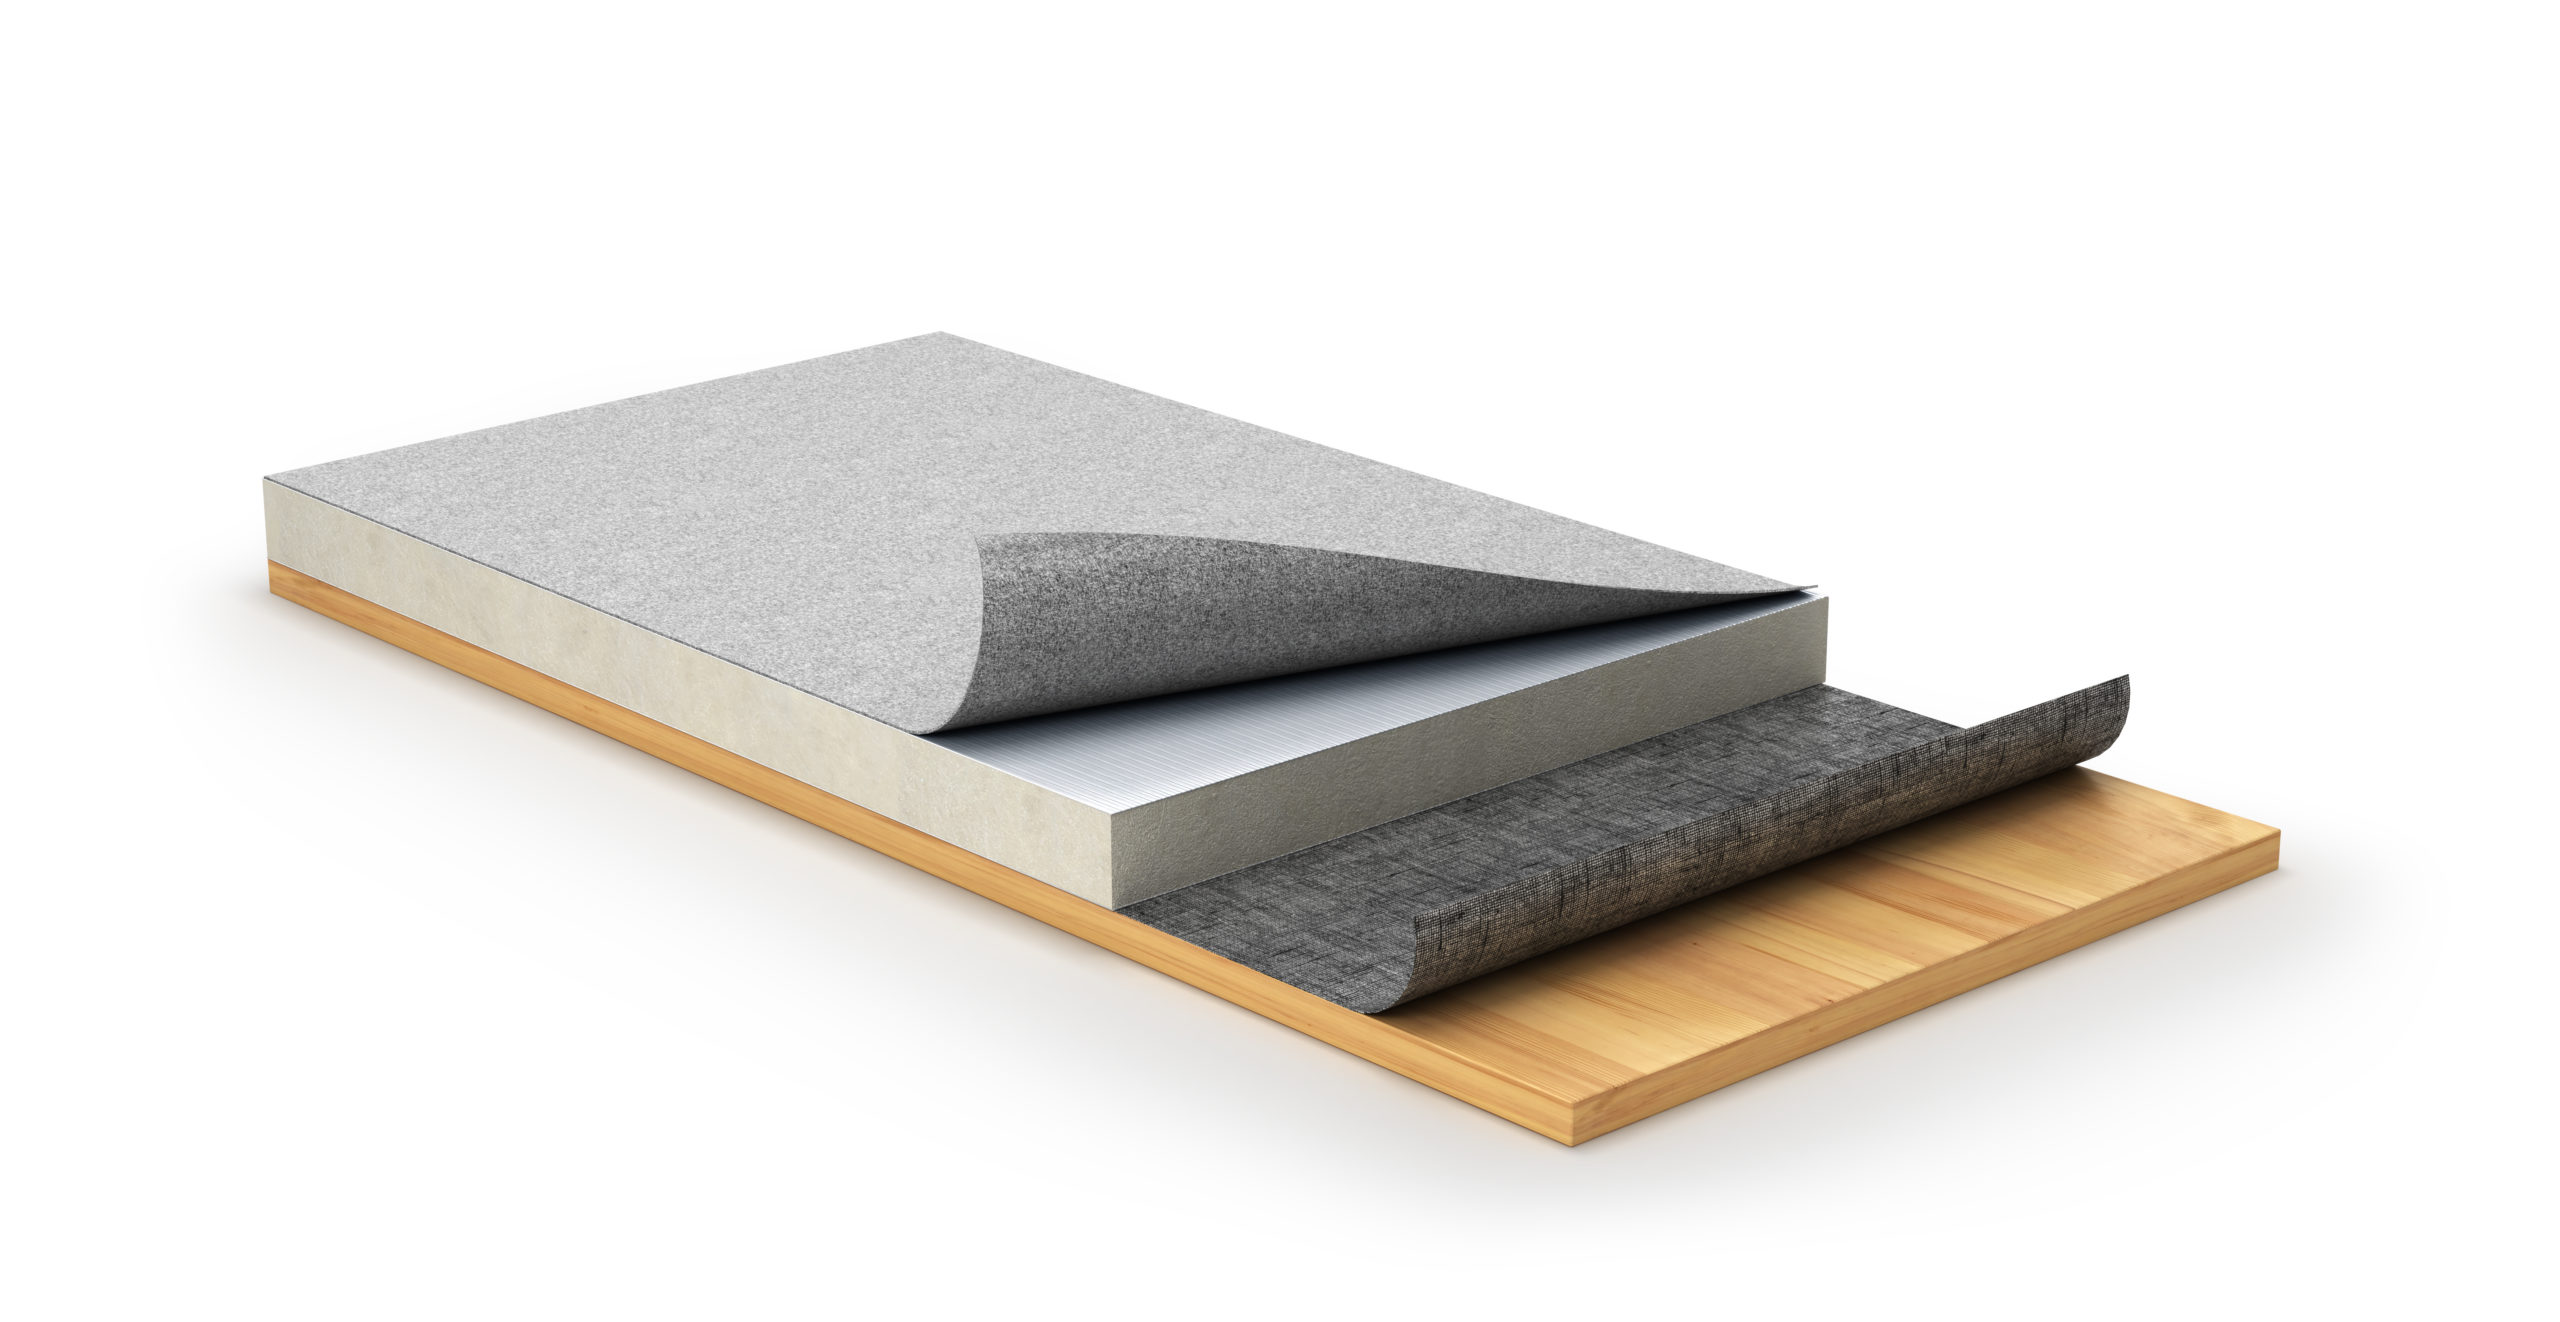 3D illustration of built-up roofing material